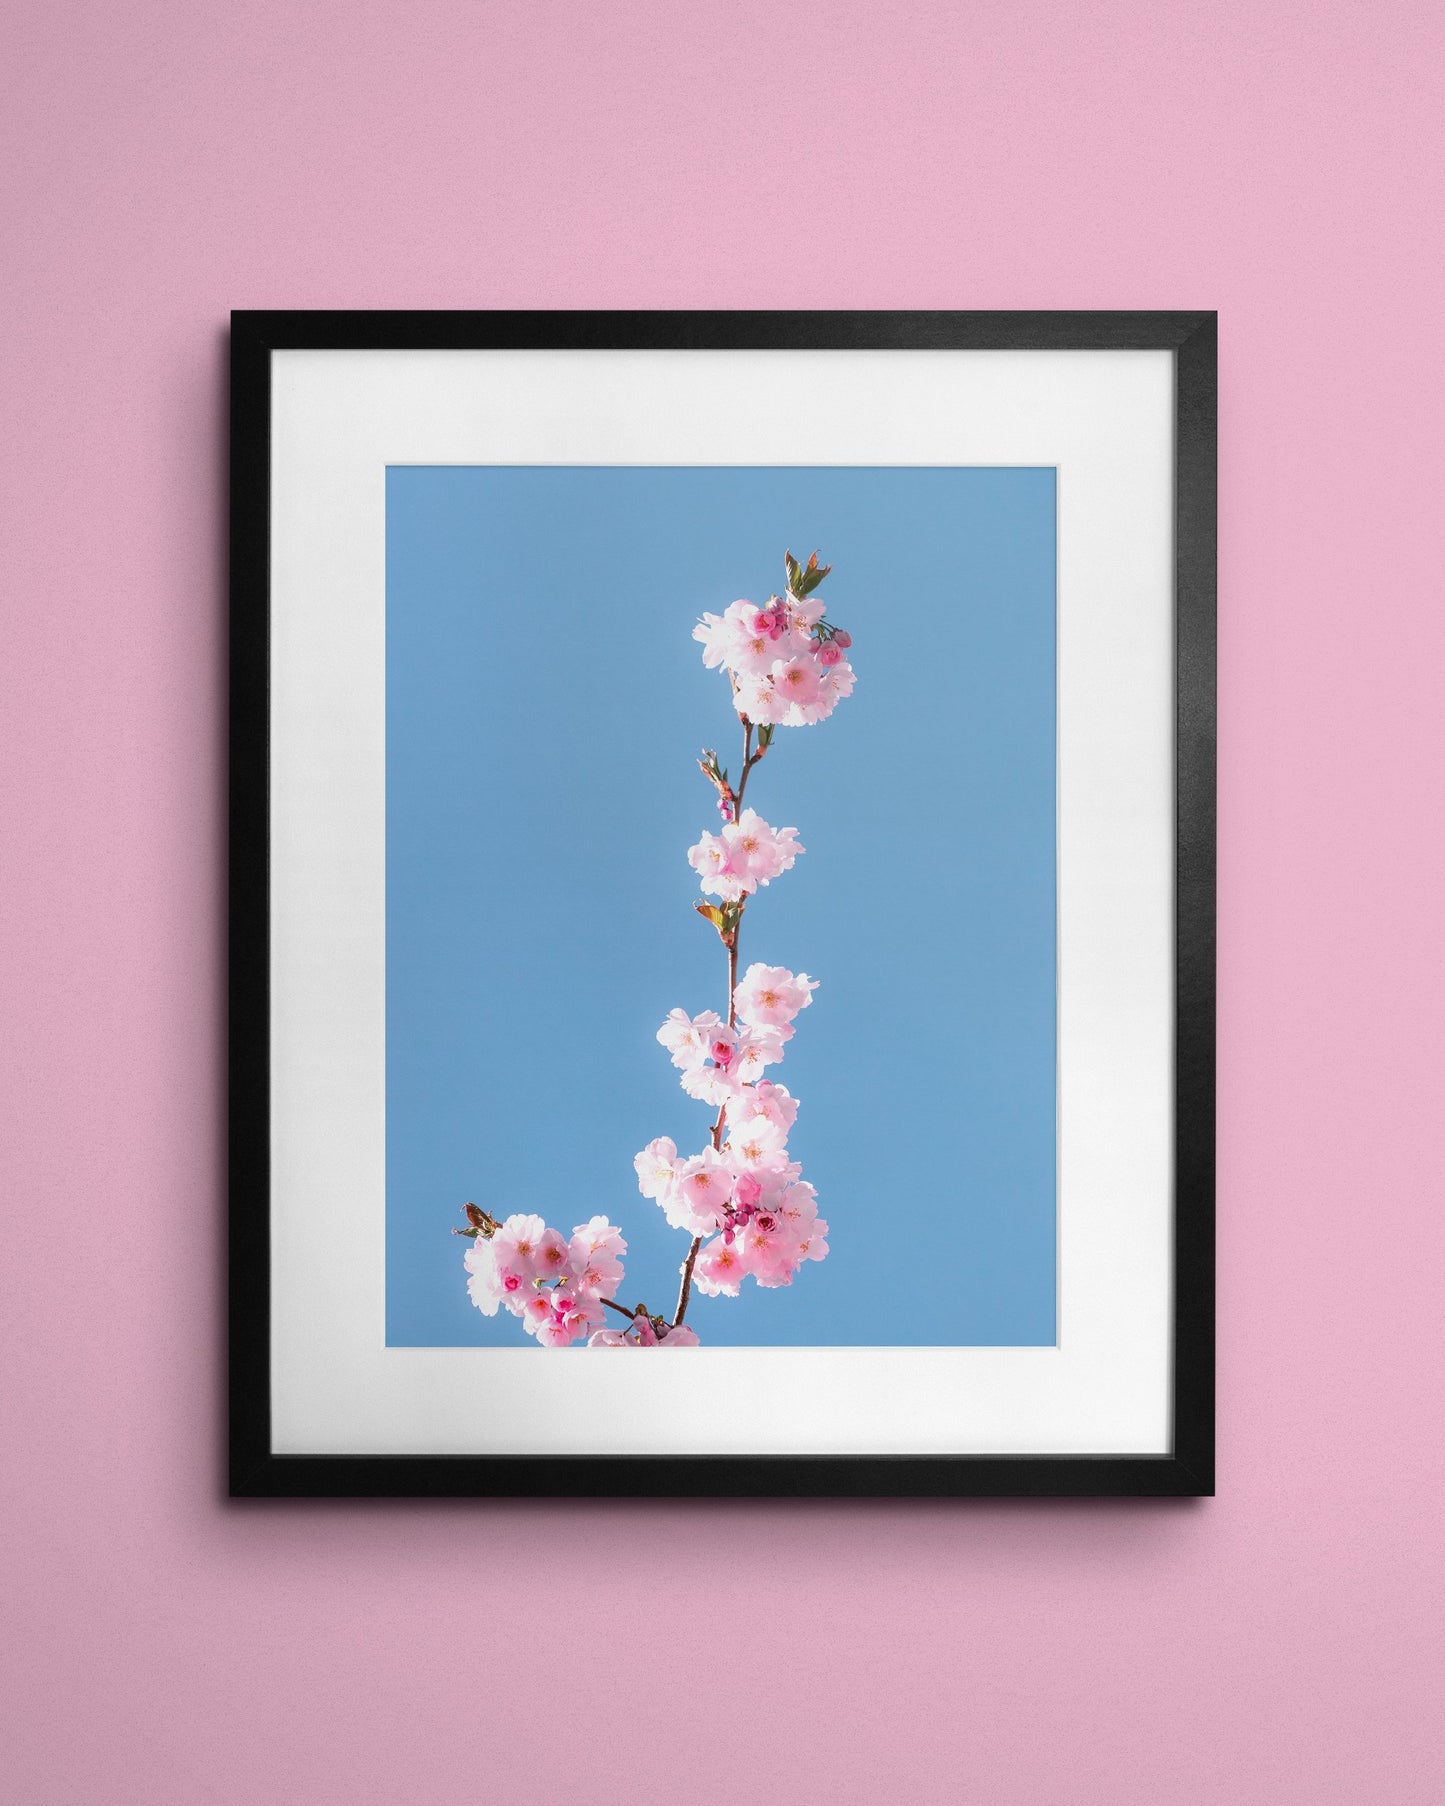 Fine-art print called First blossom from Kaj on the wall